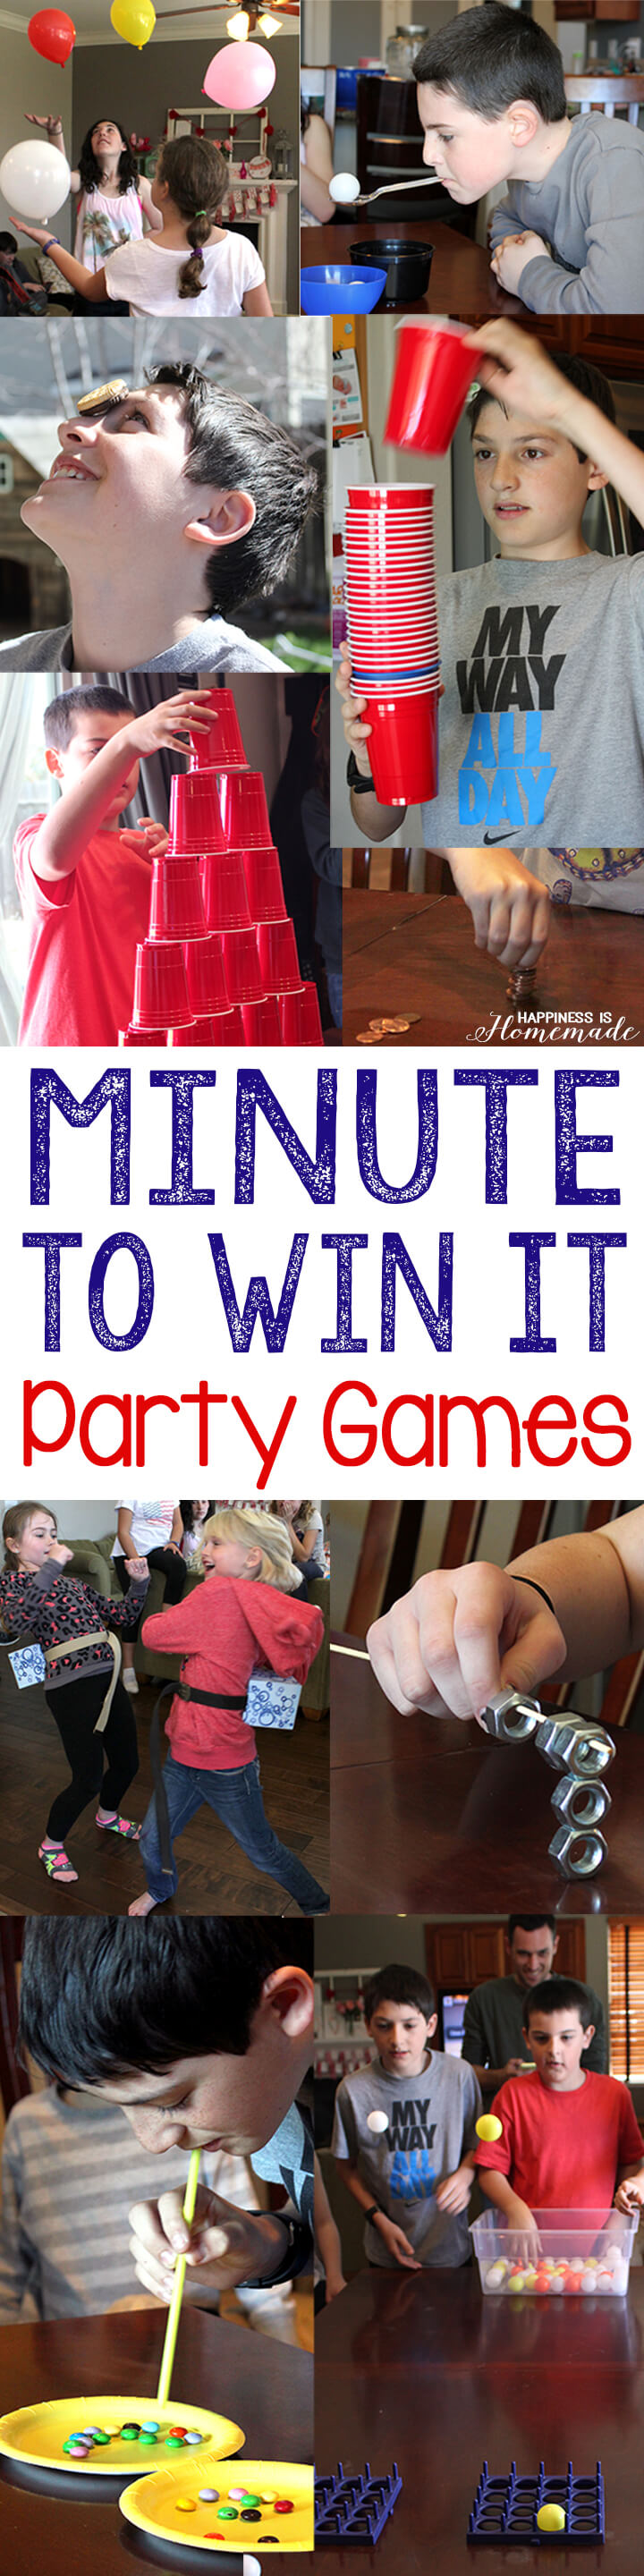 Minute to Win It?